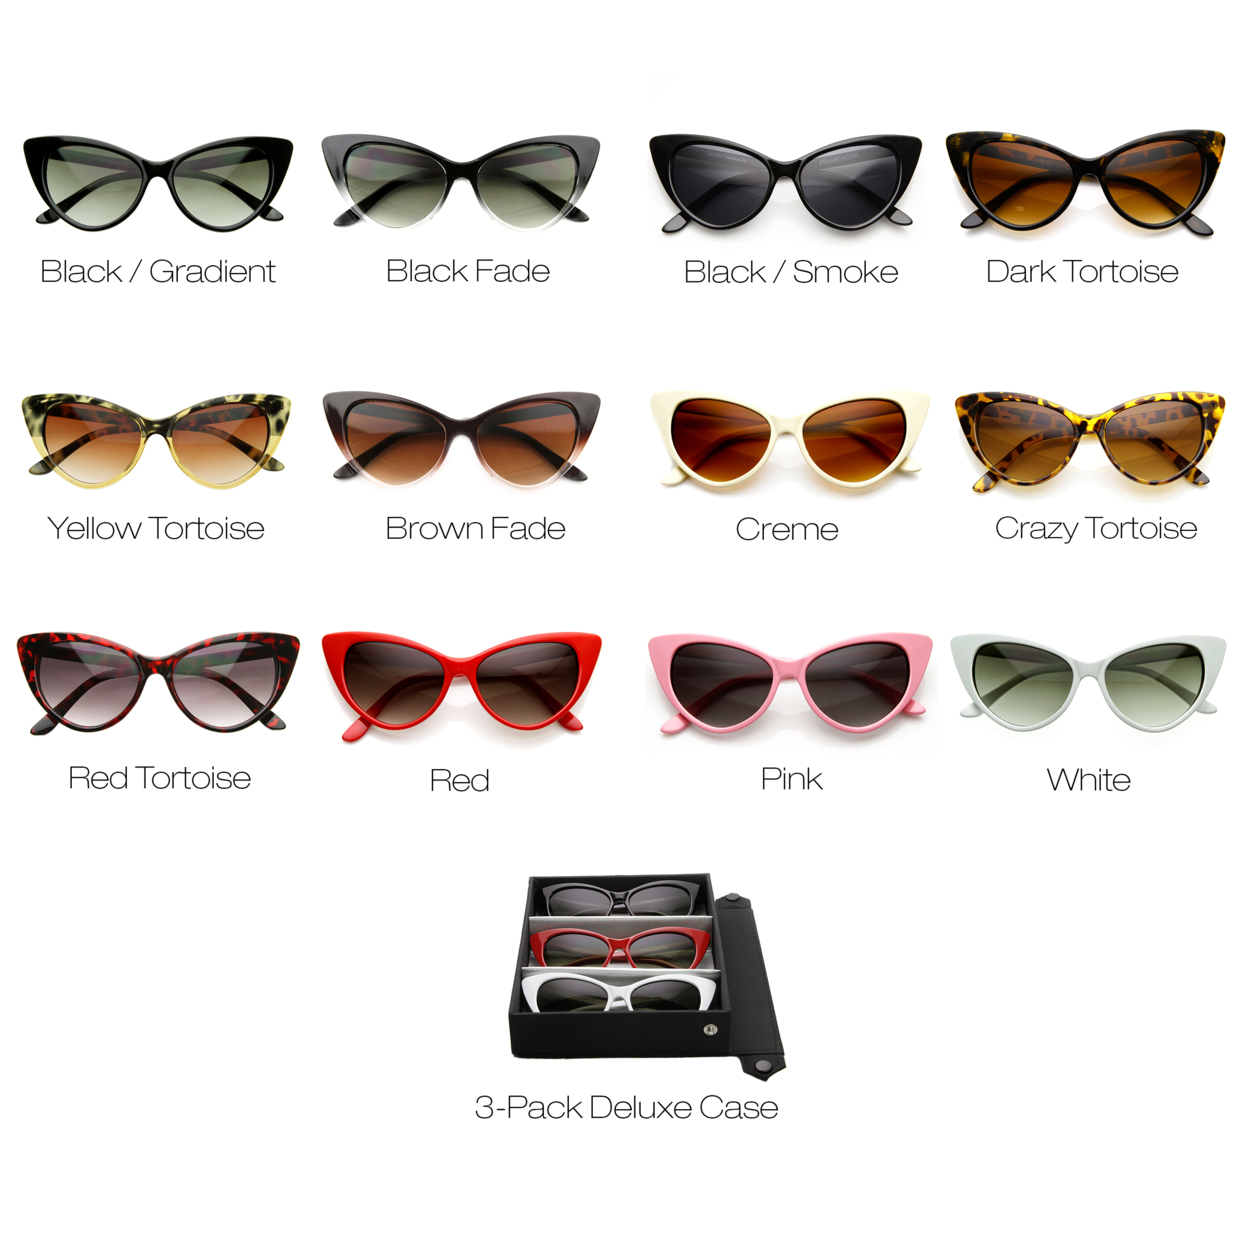 Super Cateyes Vintage Inspired Fashion Mod Chic High Pointed Cat-Eye Sunglasses - 8371 - Brown-Fade